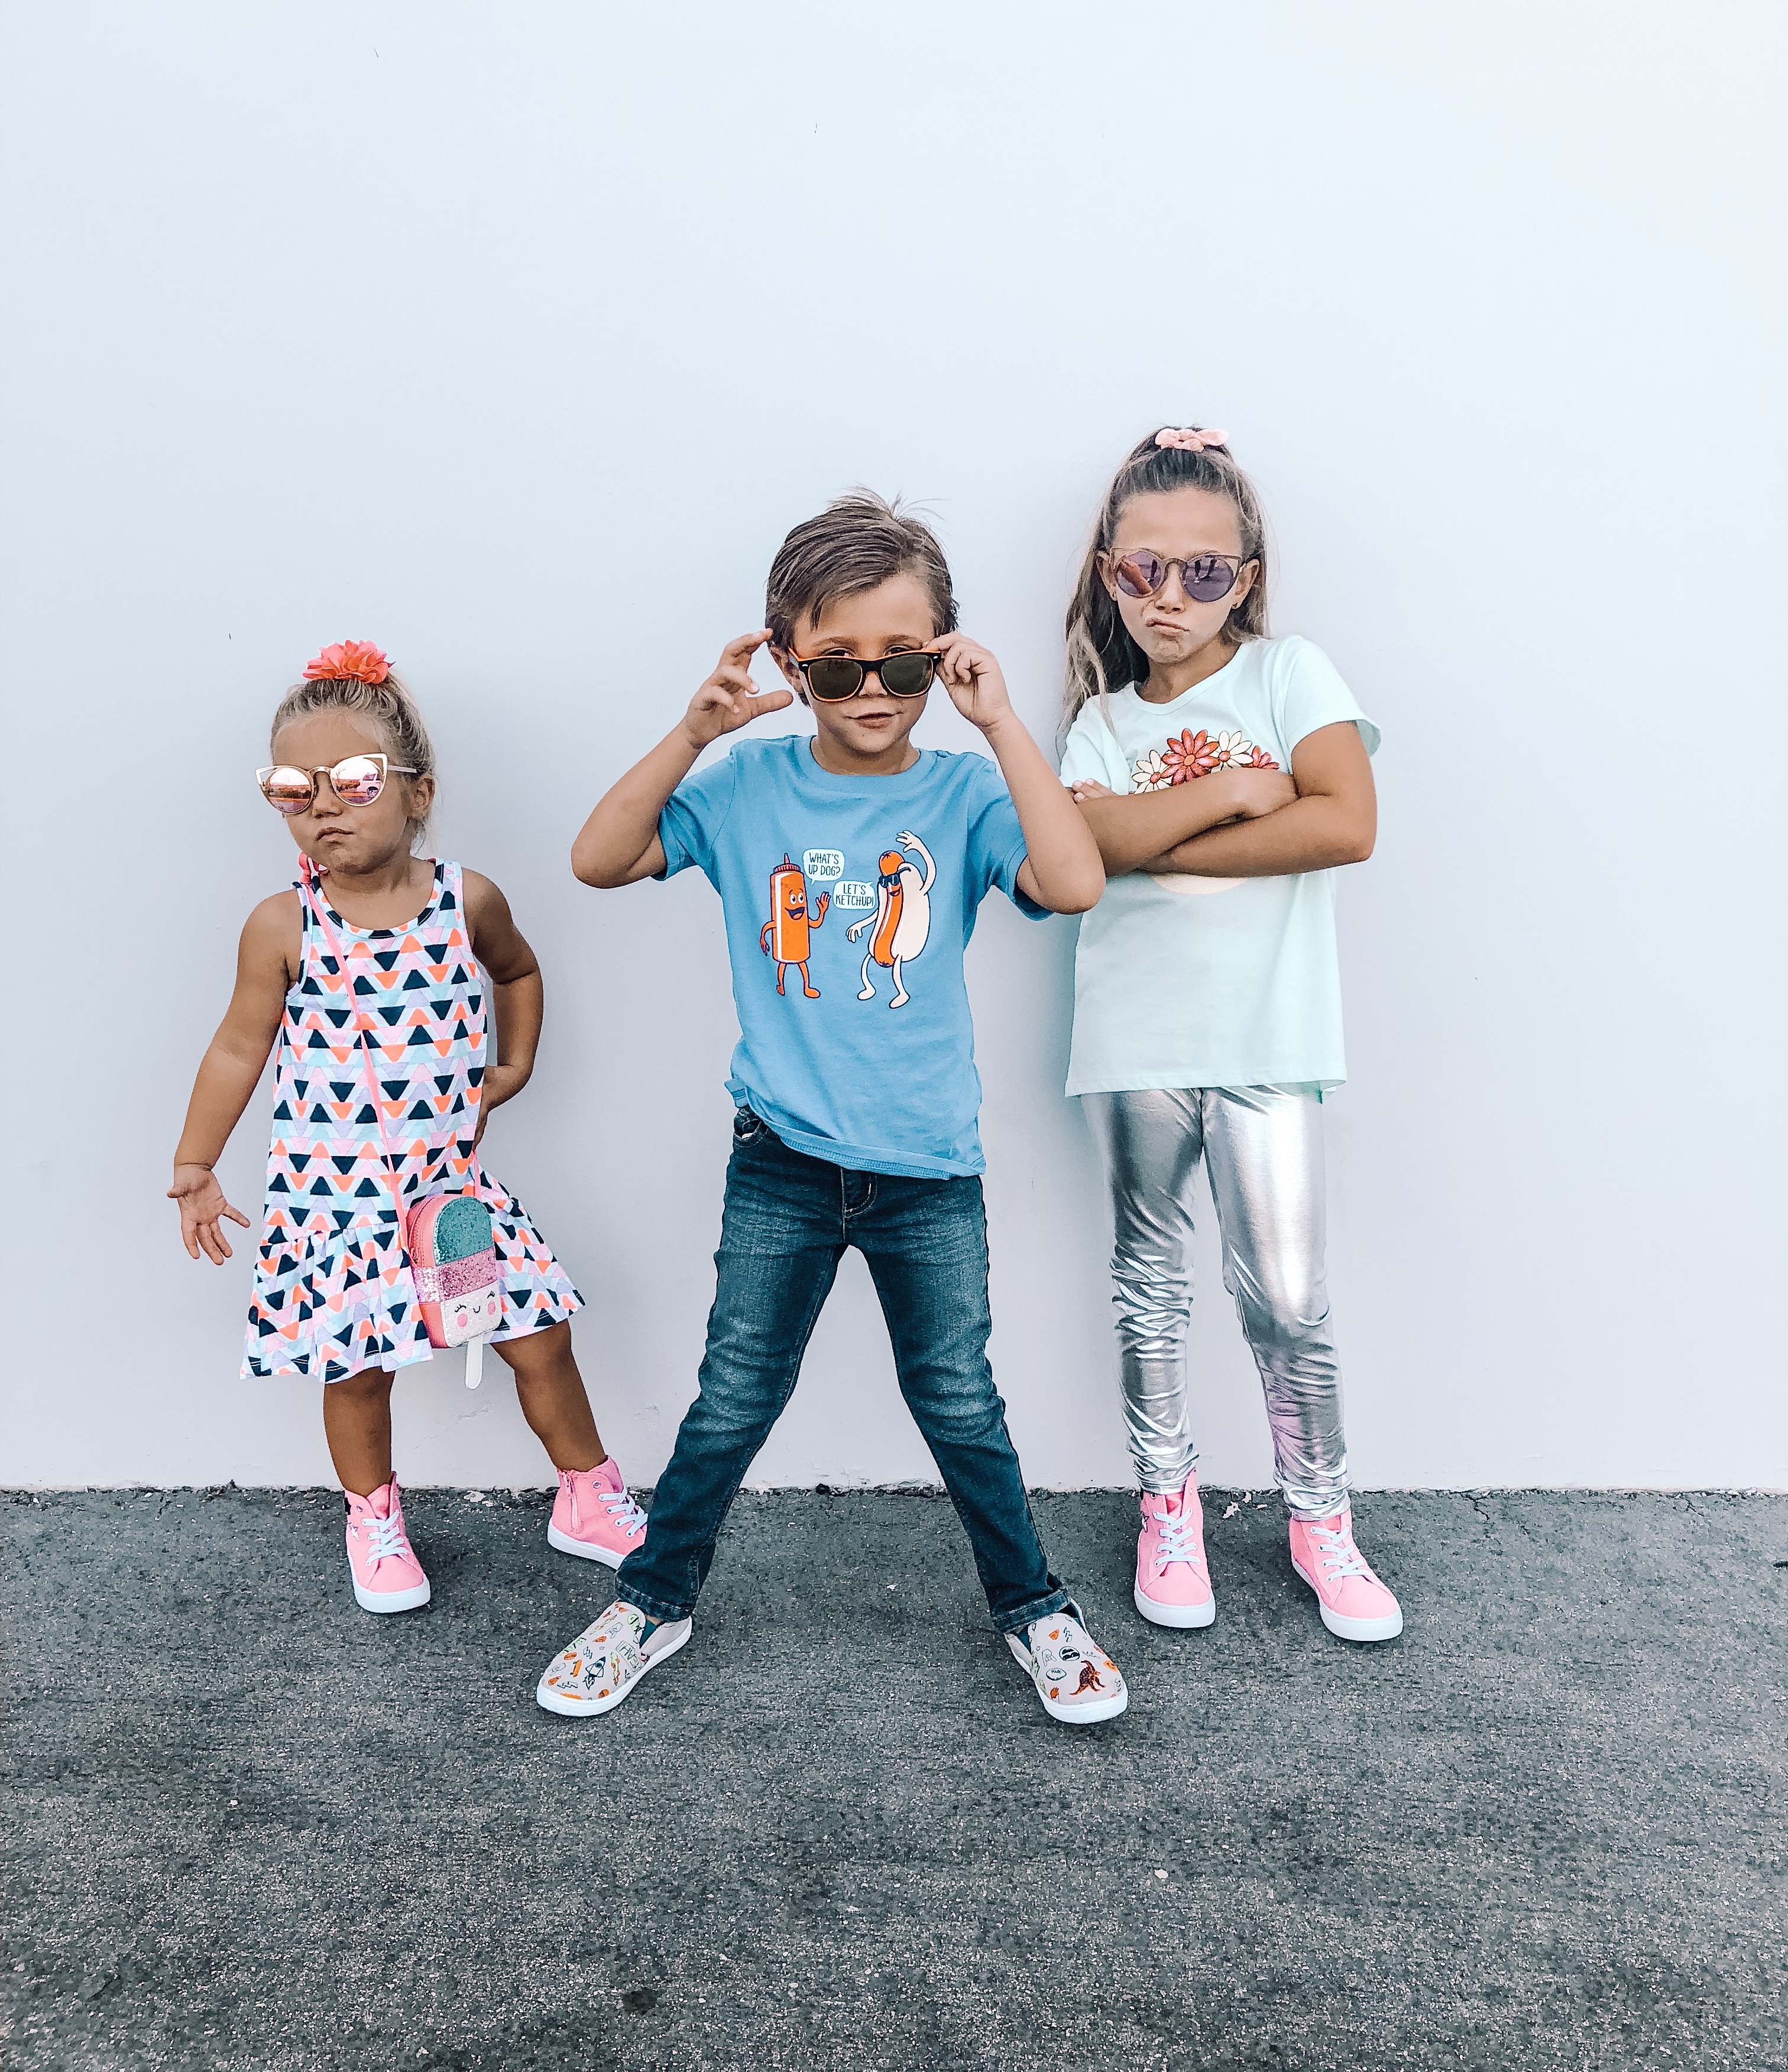 BACK TO SCHOOL WITH FABKIDS- Jaclyn De Leon Style + KID STYLE + HIGH TOPS + SUNGLASSES + KID LIFE + MOM LIFE + GETTING READY FOR SCHOOL + CHILDREN SNEAKERS + GRAPHIC TEE + METALLIC LEGGINGS + KIDS FOR REAL + FALL STYLE + SCHOOL OUTFITS + GEOMETRIC DRESS + DENIM + TOO COOL FOR SCHOOL